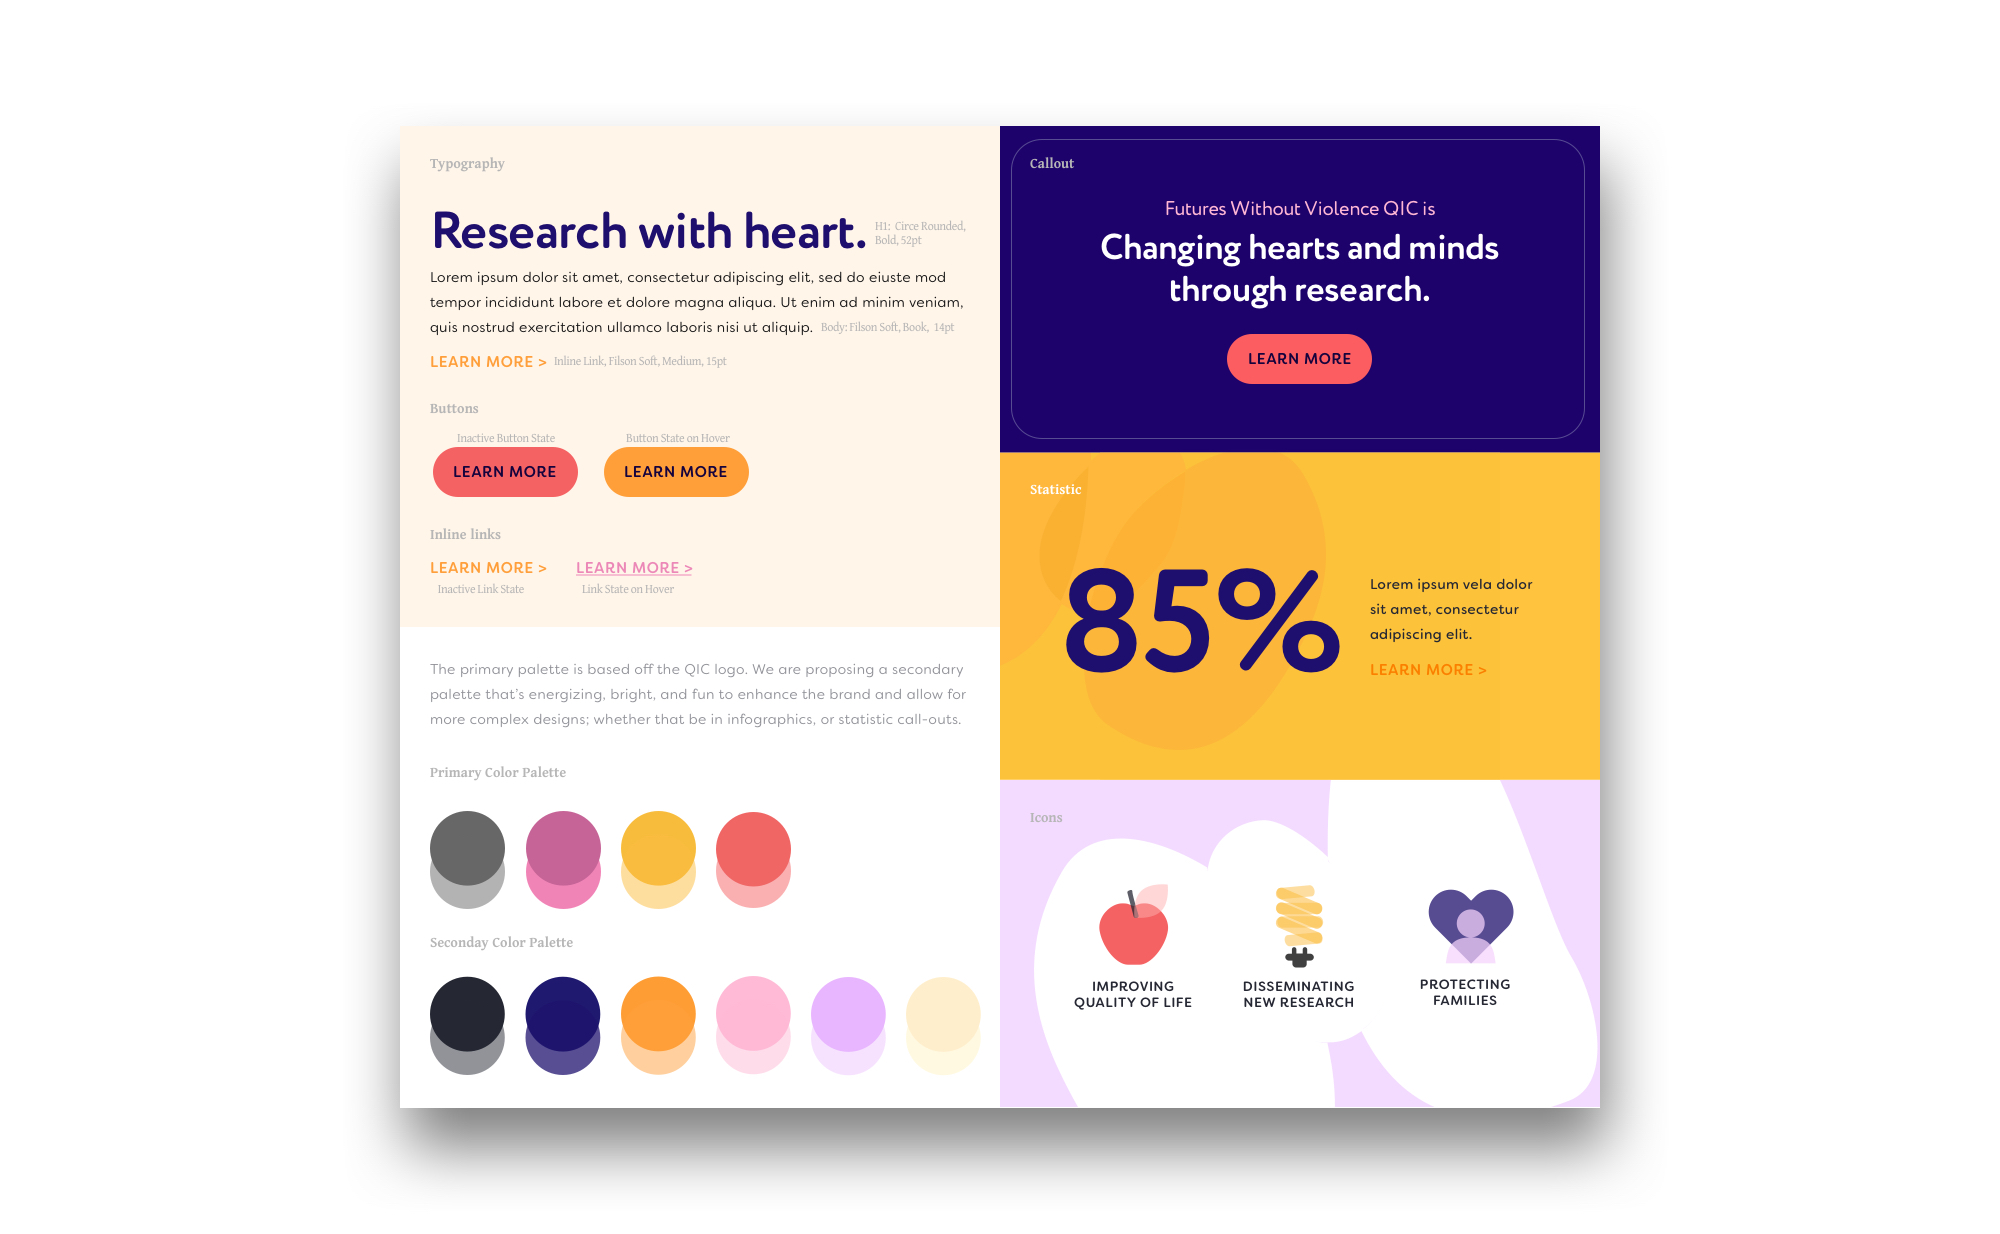 1-researchwithheart-tile copy.jpg